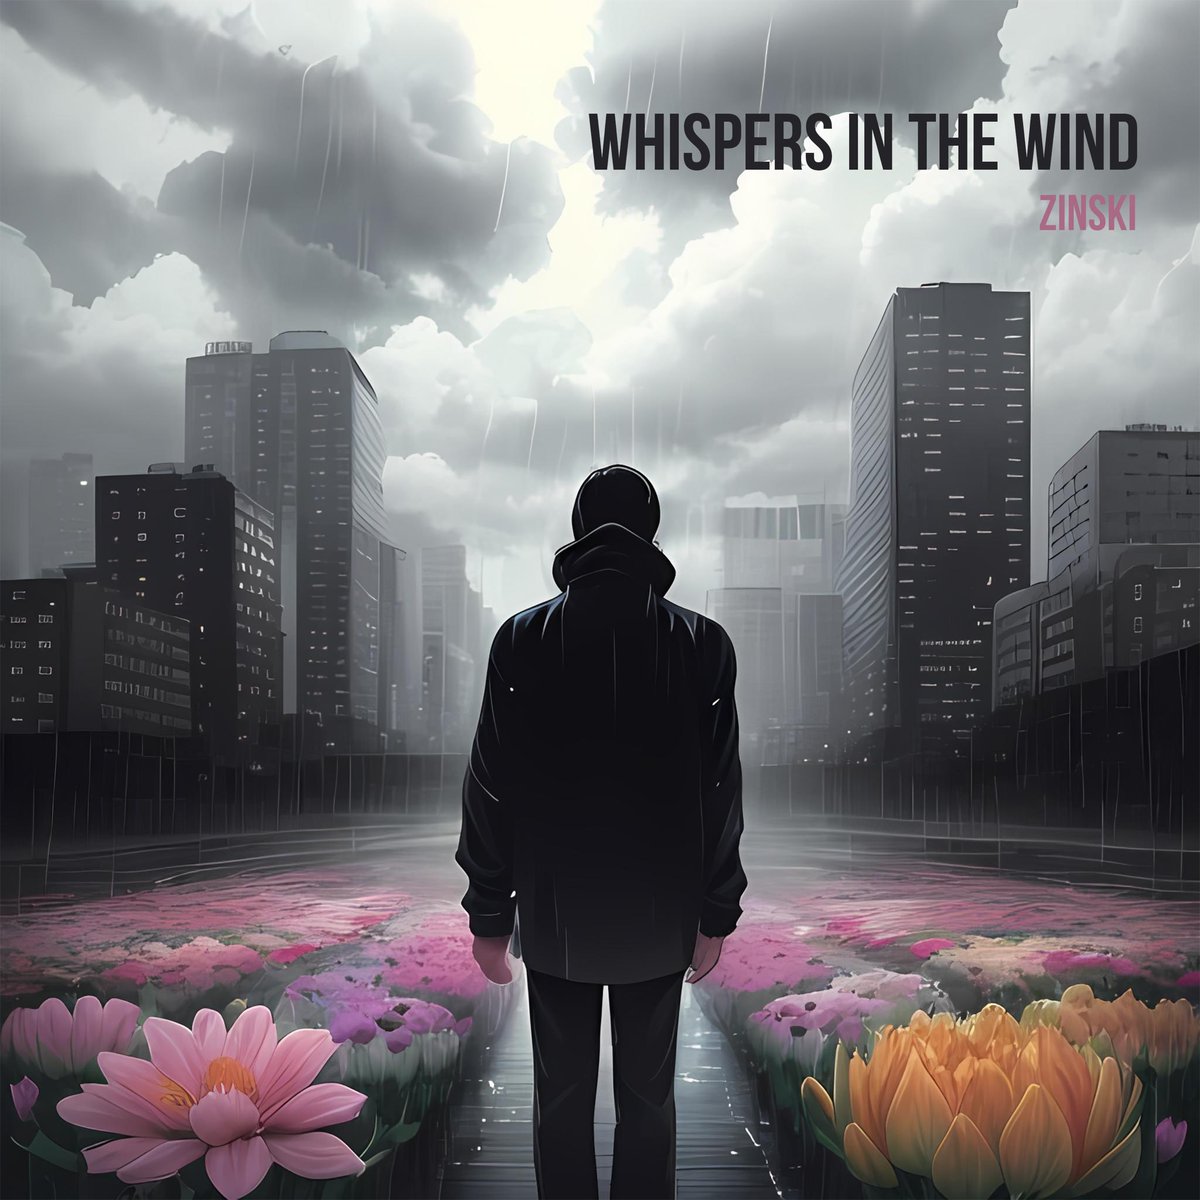 Whispers In The Wind soundcloud.com/zinski OUT NOW